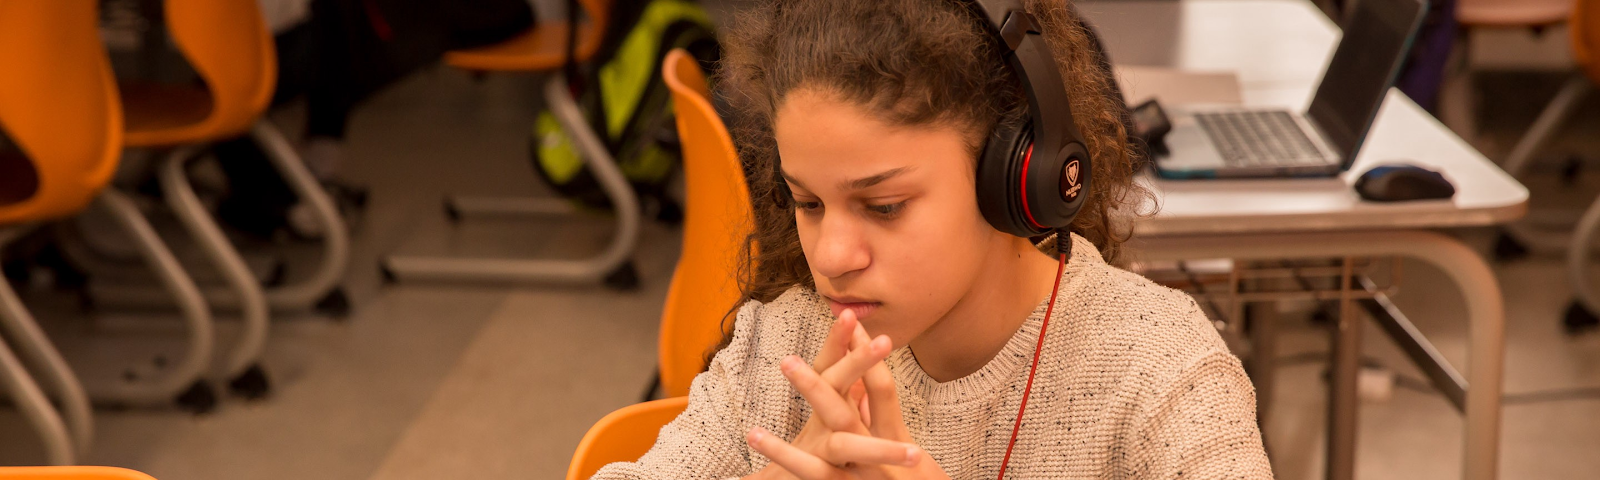 A student wearing headphones completes a CommonLit assignment on a laptop.